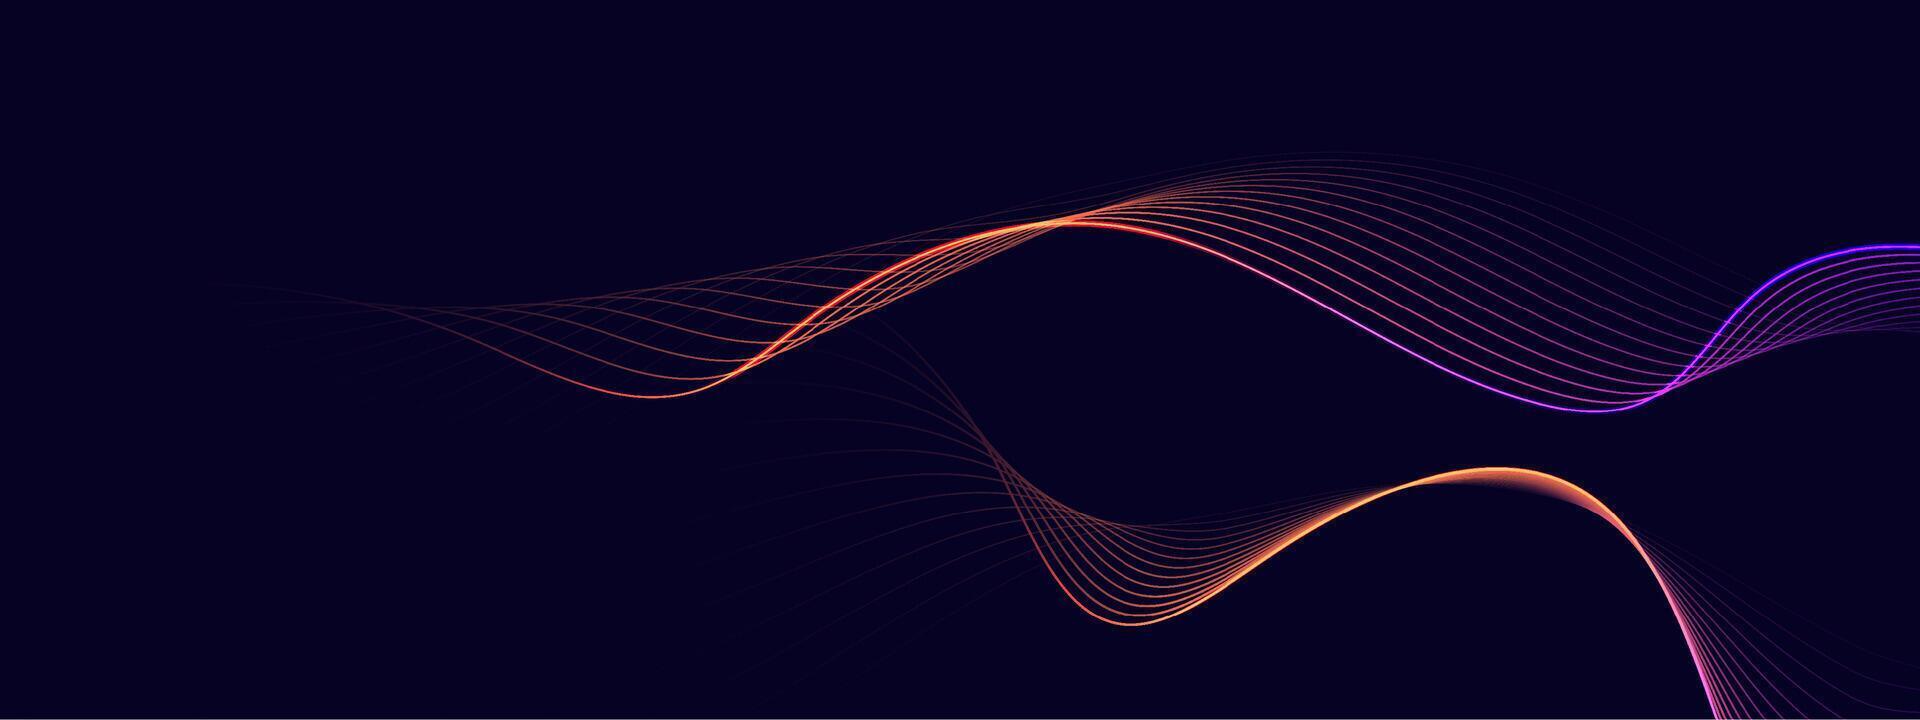 Abstract background with flowing lines. vector